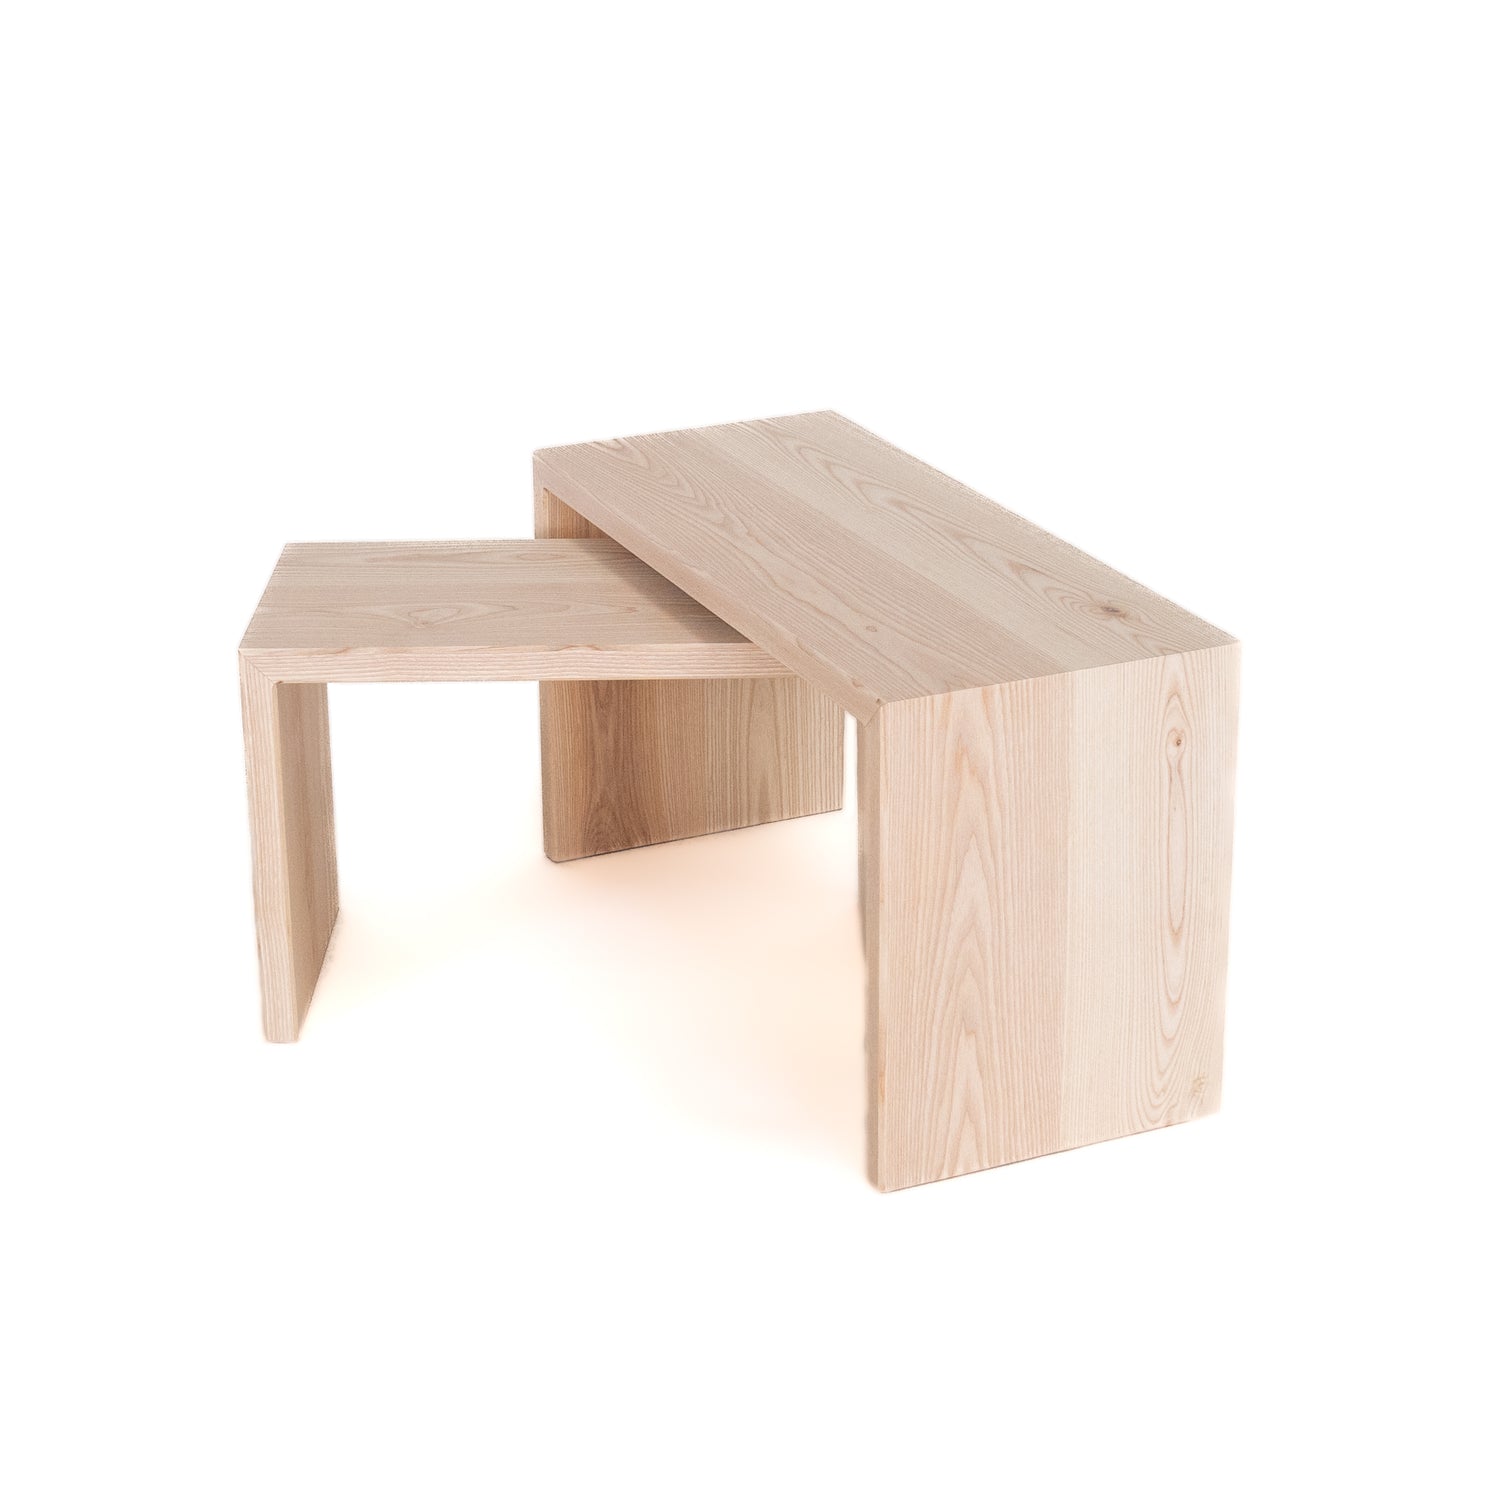 Drift Nesting Bench Set - a light natural wood, waterfall-style bench set, on white background